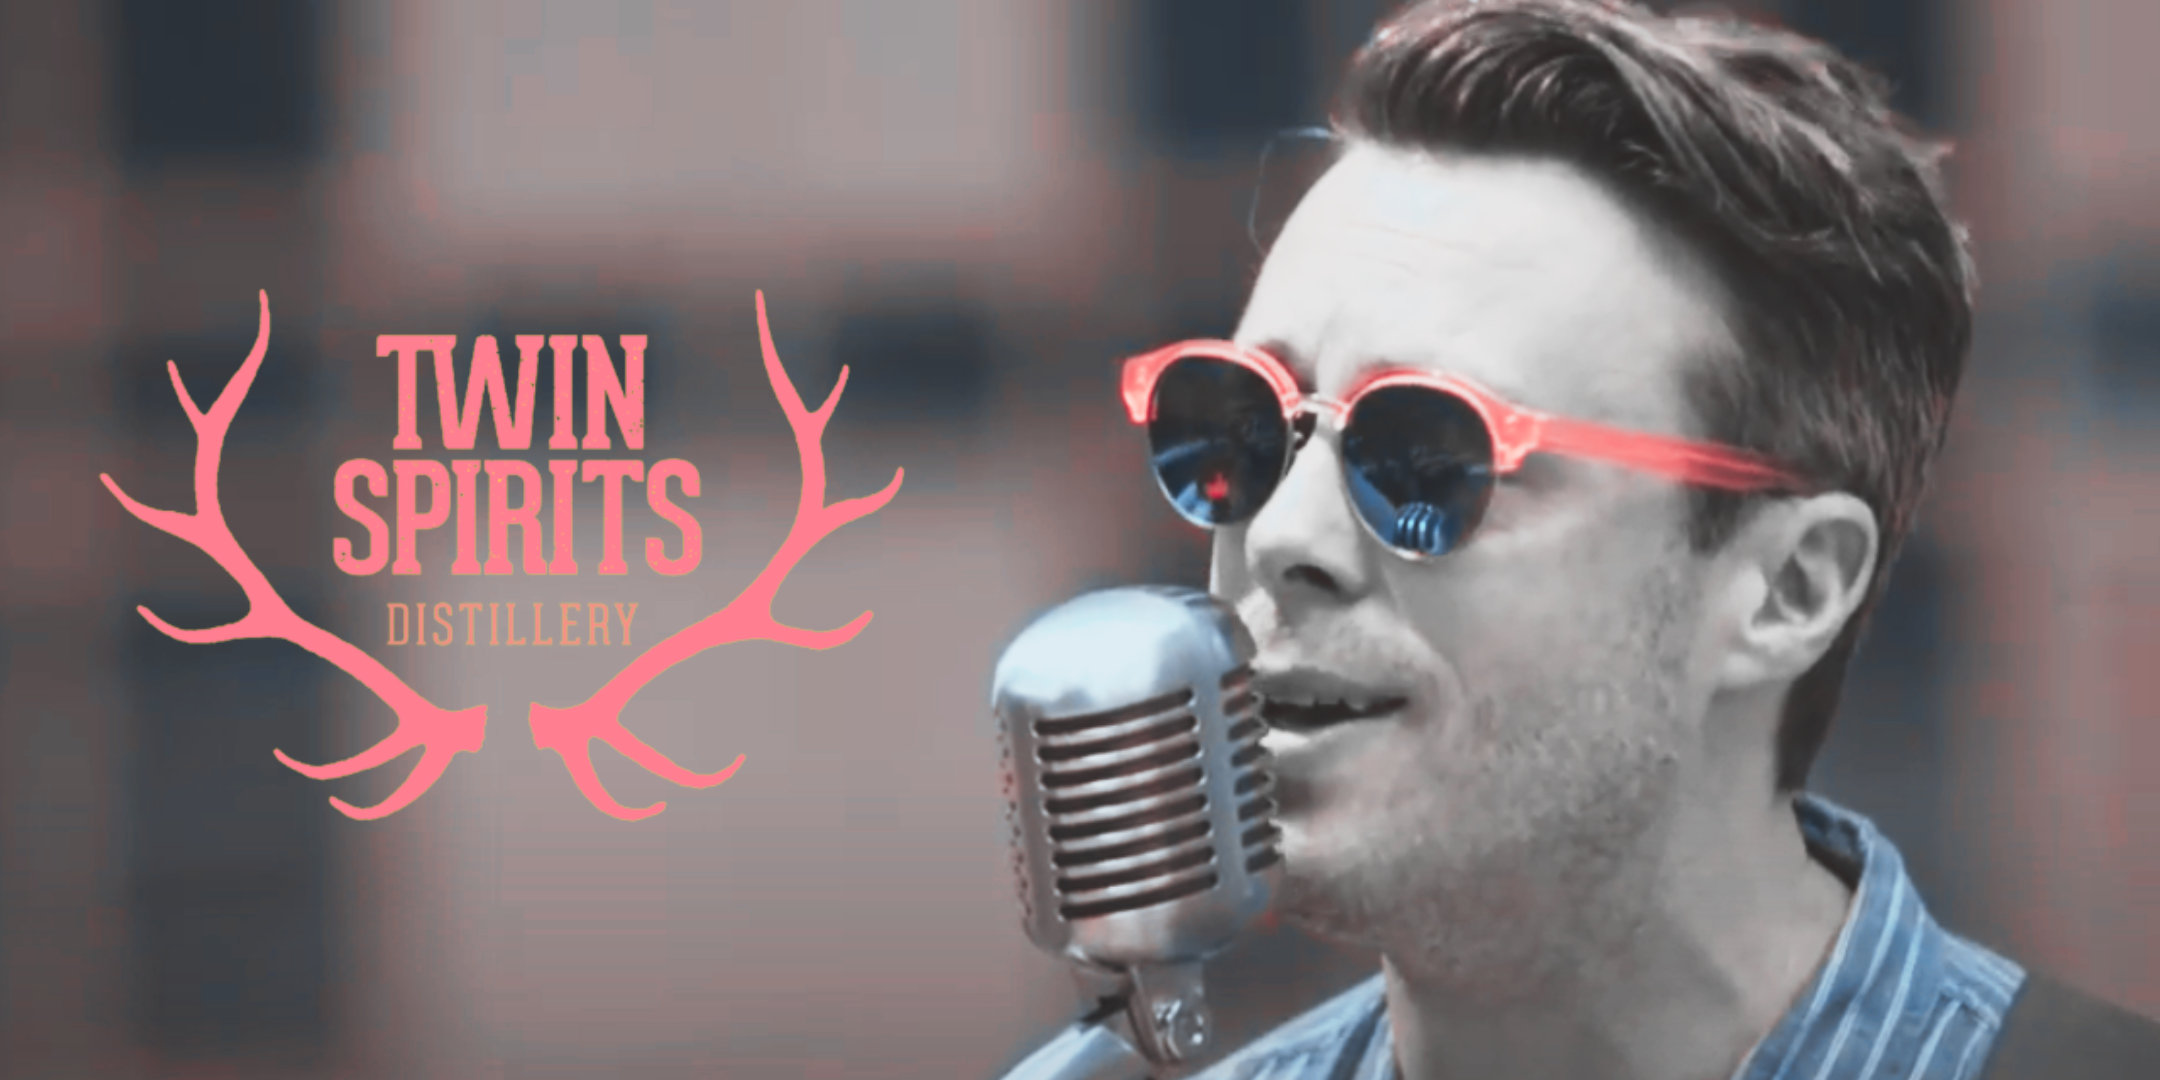 An Evening with jeremy messersmith Tuesday August 23 at Twin Spirits Distillery (Outdoor) Doors 5:00pm :: Music 7:00pm :: All Ages (21+ To Drink) RAIN or SHINE ----- 4-Top Tables - $40/tickets 2-Top Tables - $40/tickets Barrels (Standing) - $30/tickets GA (Chairs) - $30/tickets